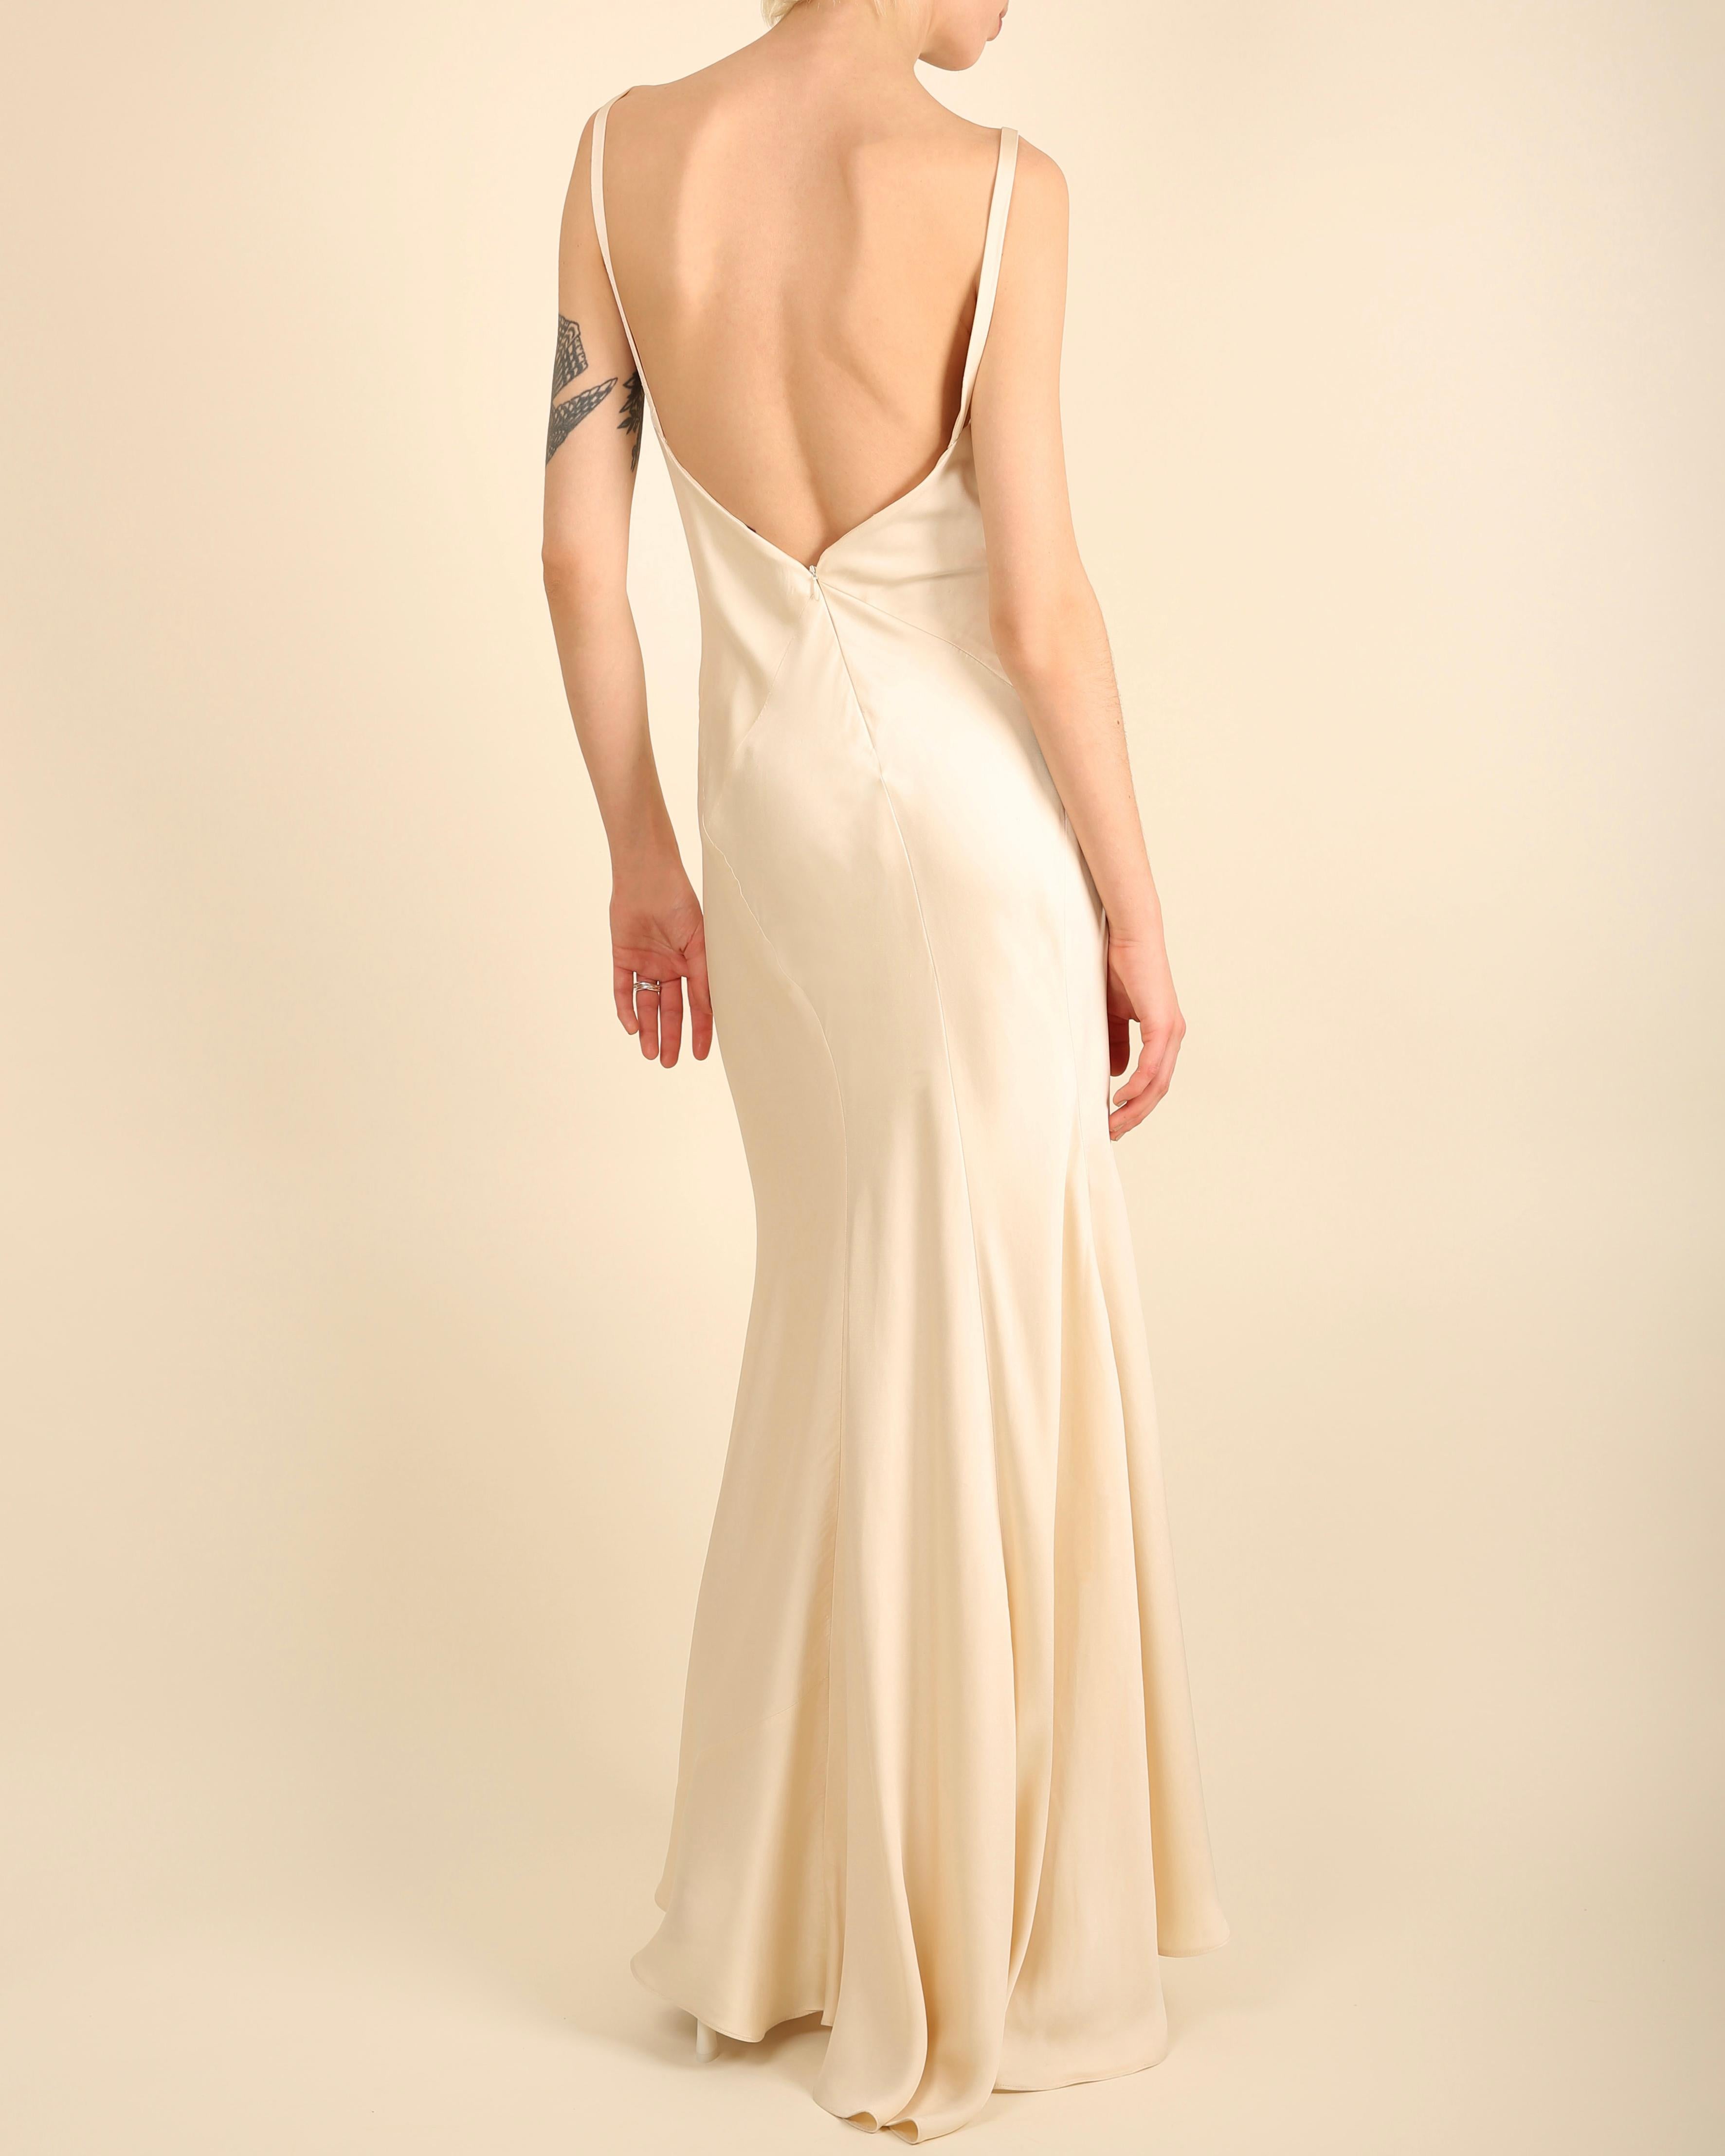 Beige Ralph Lauren champagne bias cut backless silk slip style backless gown dress For Sale